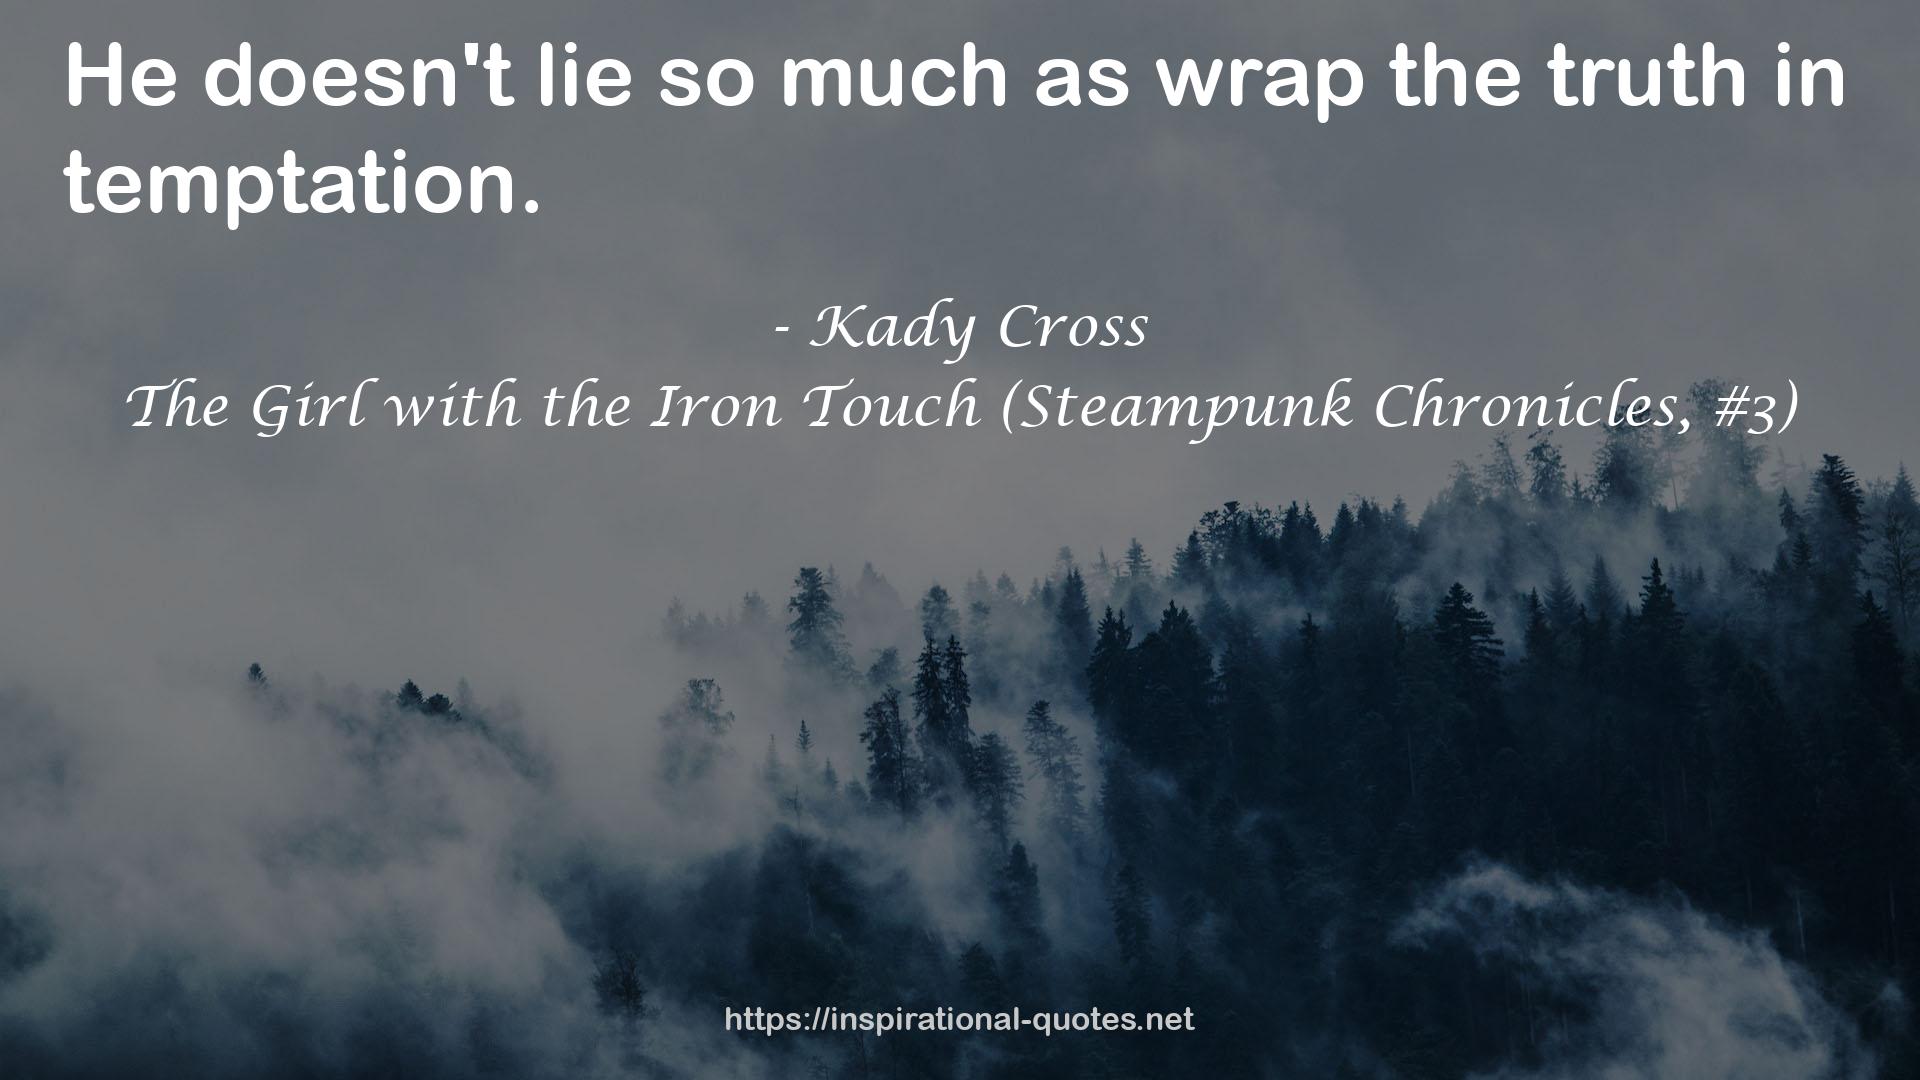 The Girl with the Iron Touch (Steampunk Chronicles, #3) QUOTES